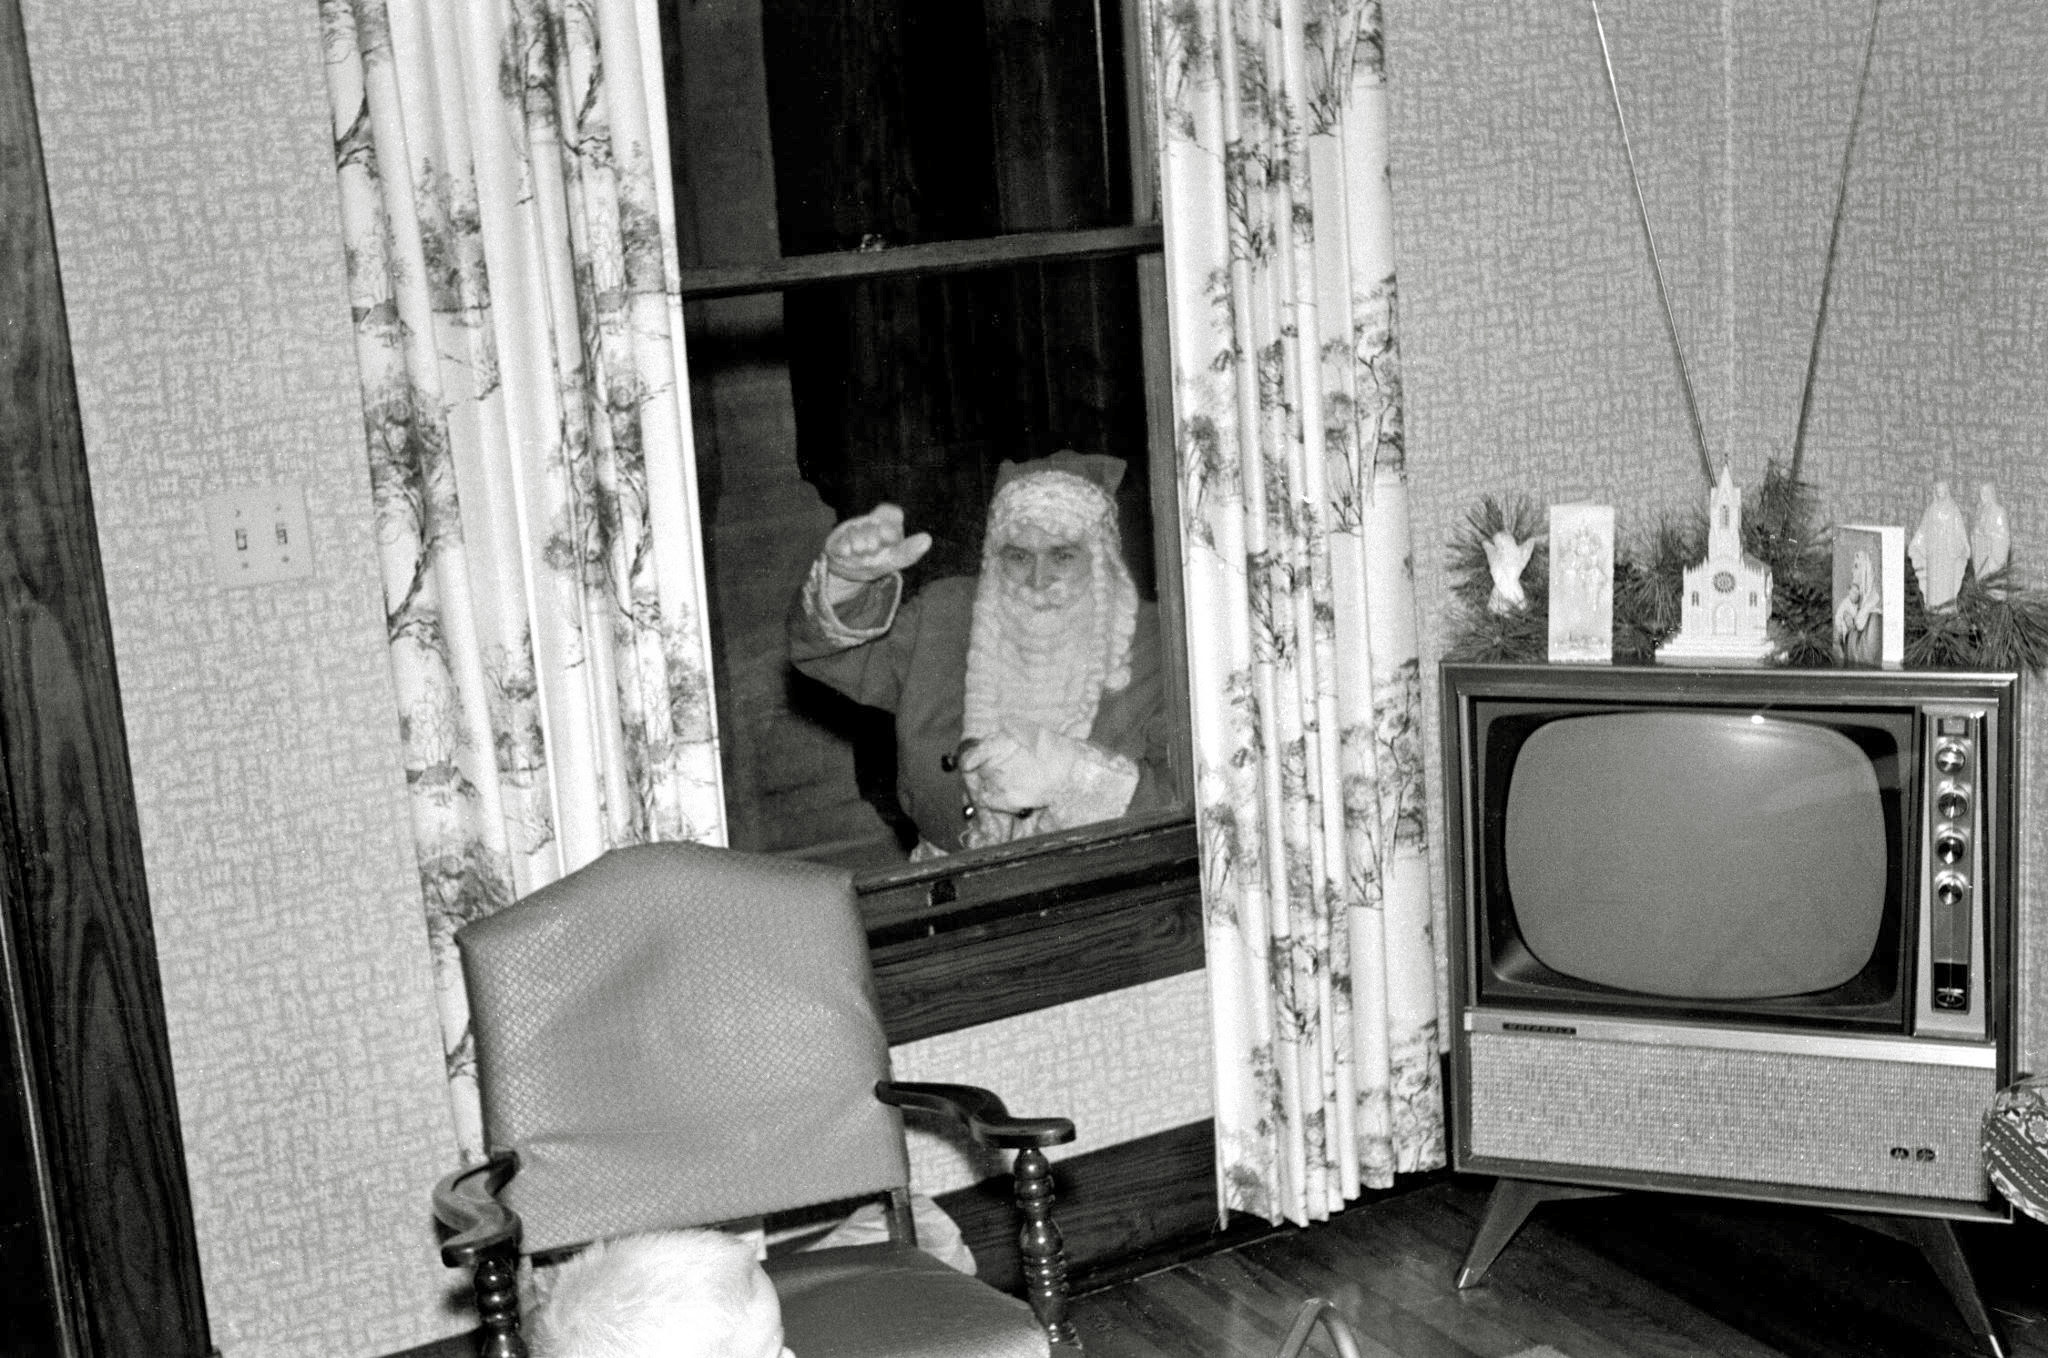 This picture is from the early 1960s.  Every year my mother's family gathered at the farm house to celebrate Christmas Eve.  For a brief few years Santa arrived during our party to distribute gifts.  I was young enough and excited enough not to notice the absence of my Uncle Tommy during Santa's visit.  As Tommy's boys became old enough to be aware of his absence, Santa stopped coming to the party.

Uncle Tommy was reasonably serious and reserved healthcare professional, so it is fun to see him hamming it up, giving us all a thrill for Christmas. View full size.